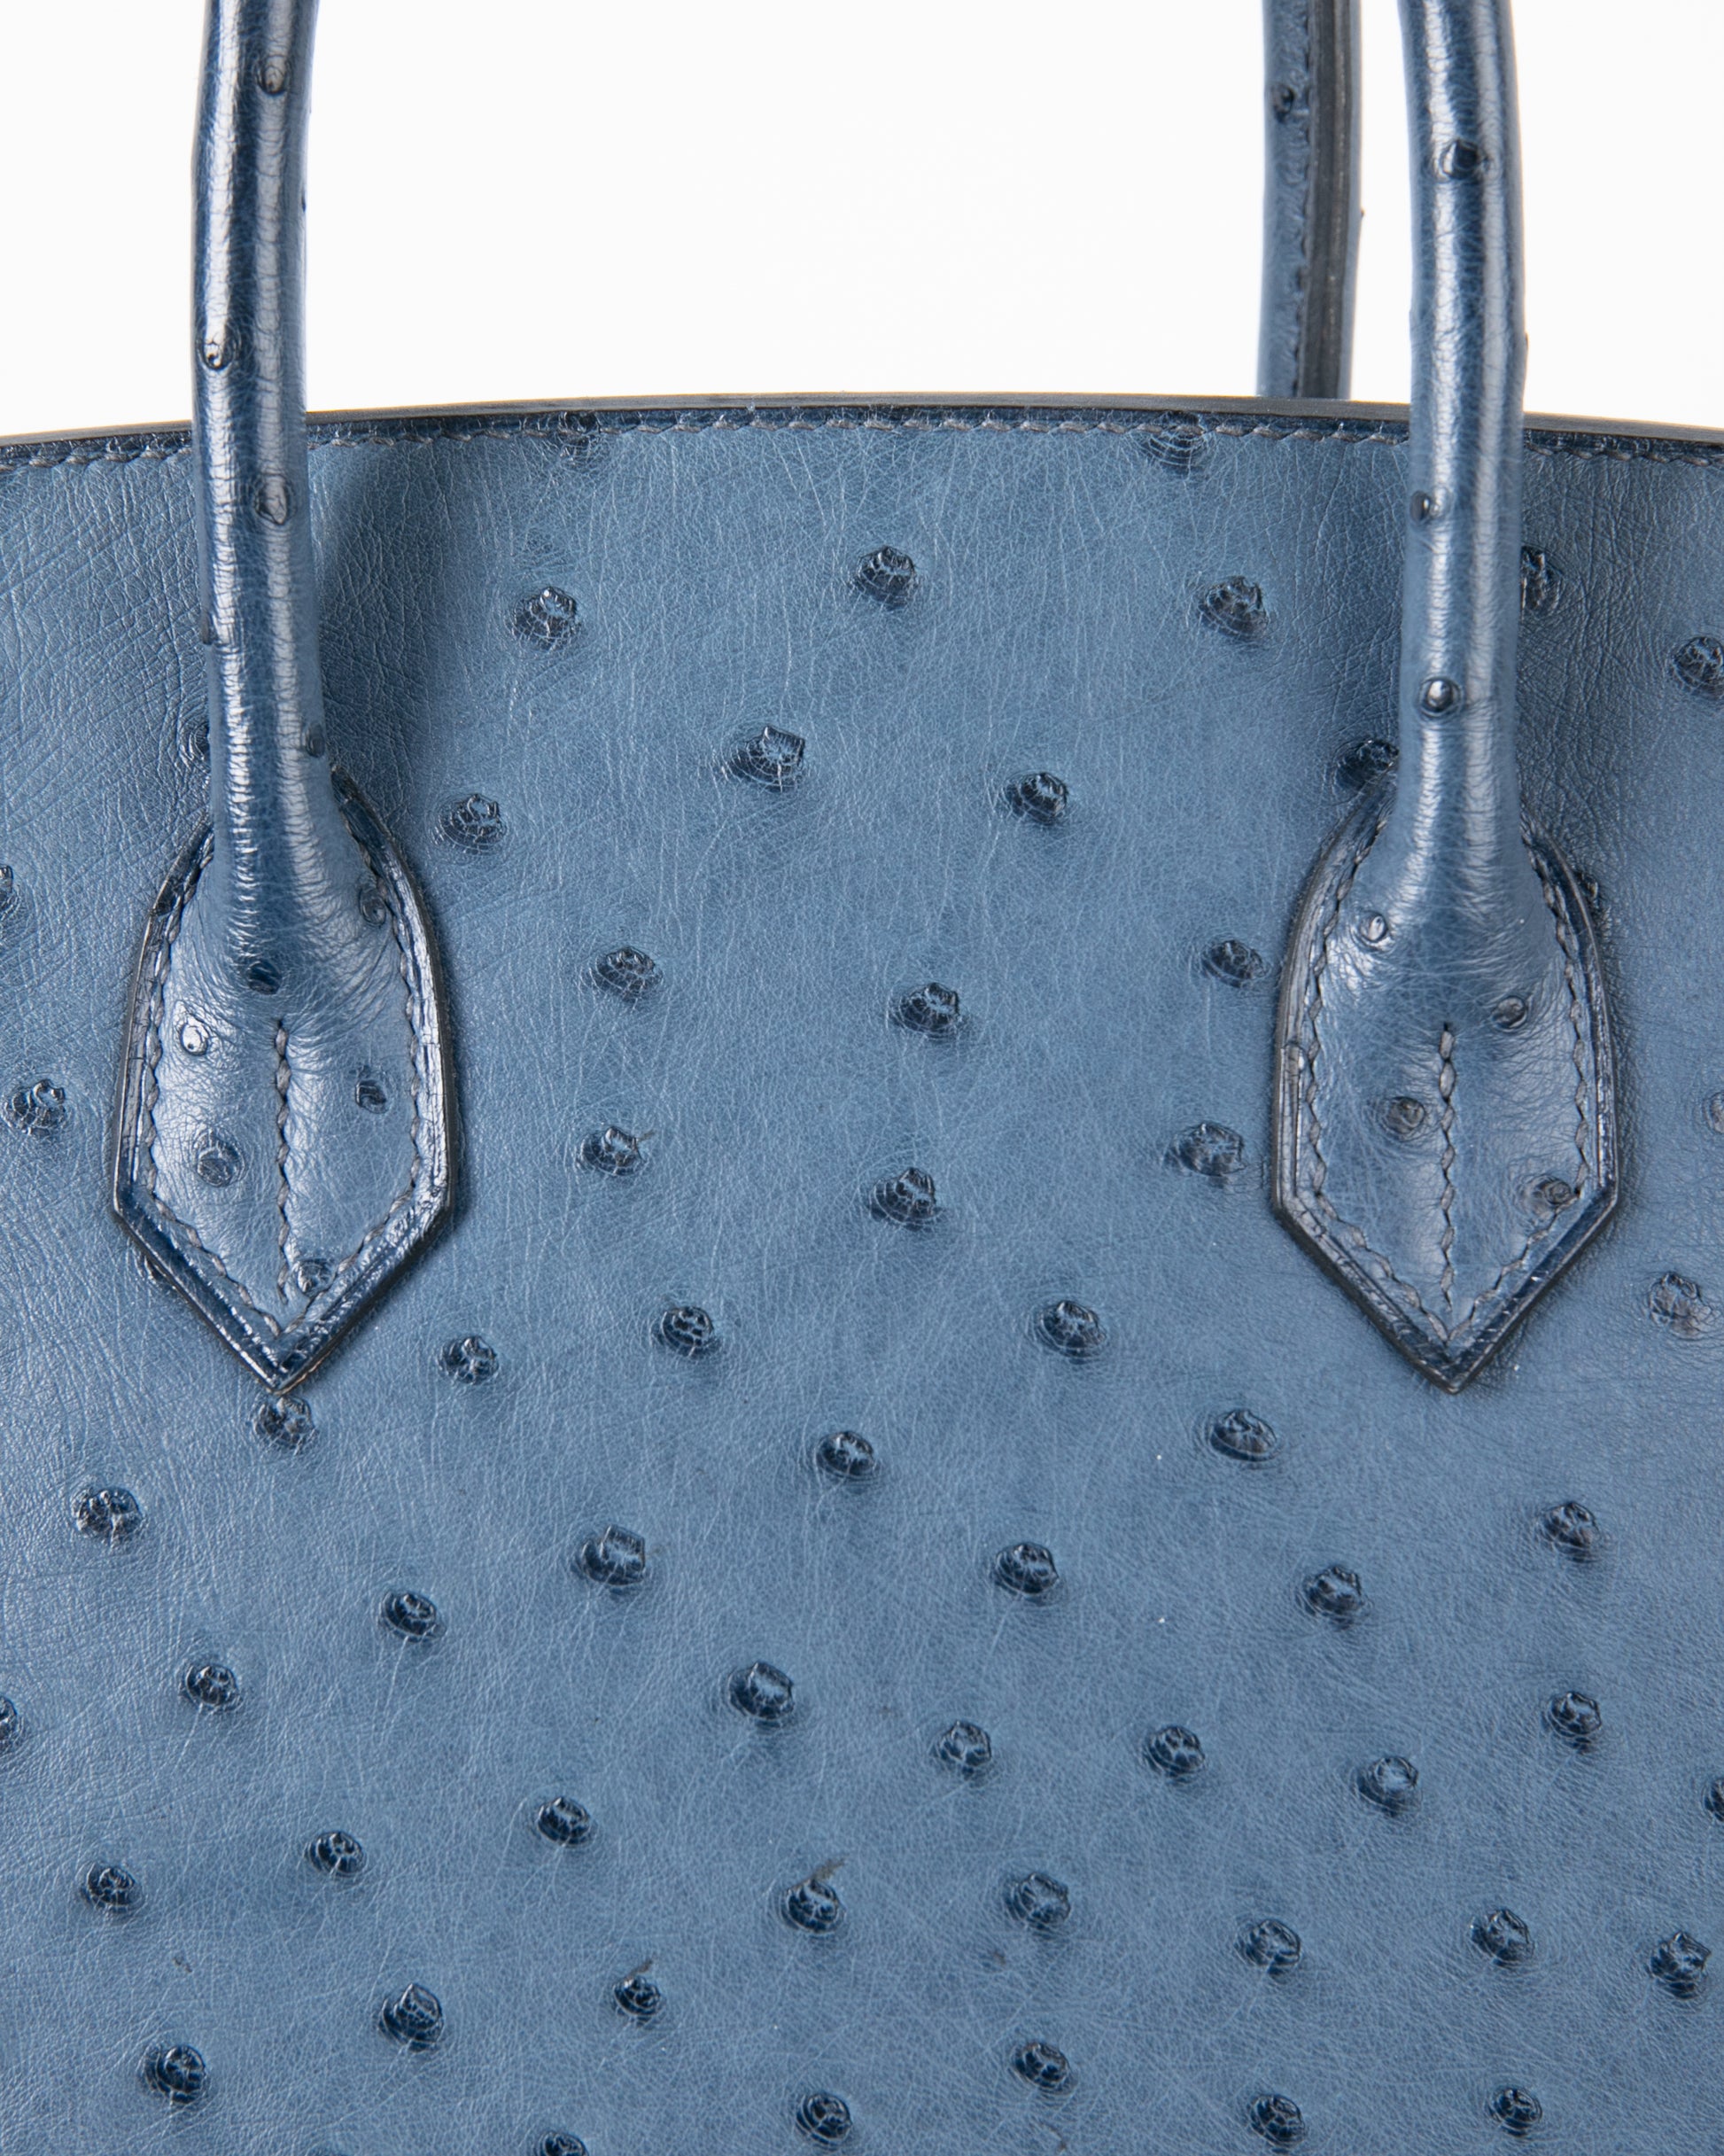 Hermes 30cm Blue Iris Ostrich Birkin Bag with Gold Hardware., Lot #58021, Heritage Auctions